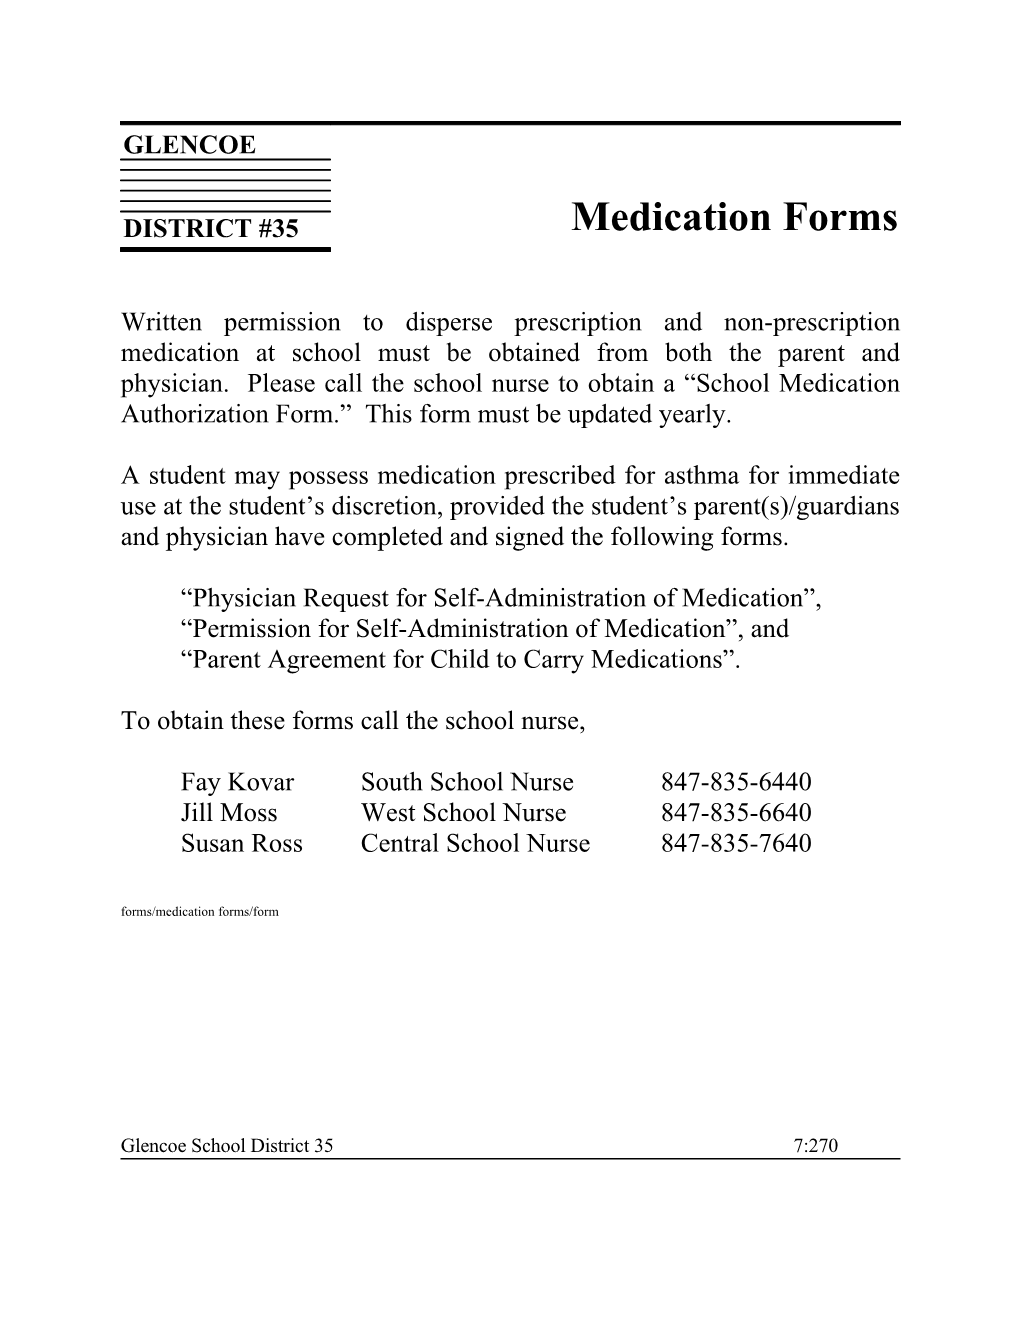 Physician Request for Self-Administration of Medication